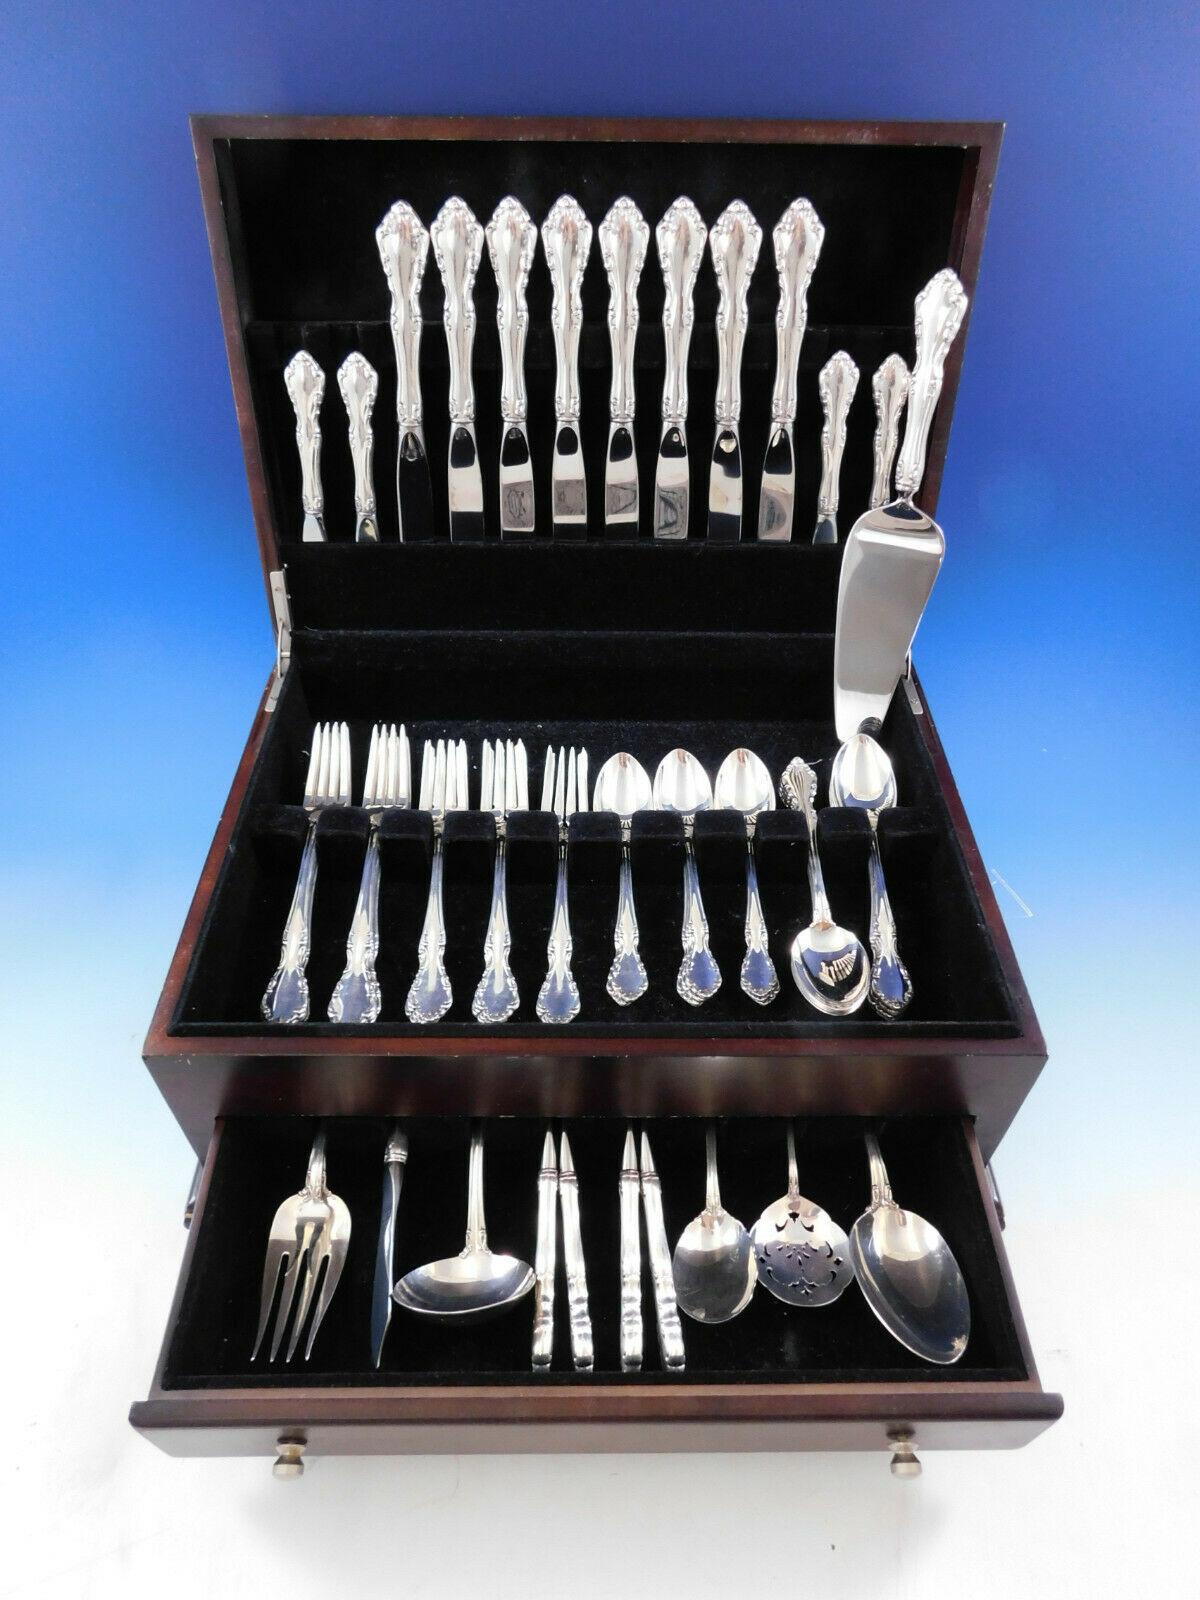 Chelsea Manor by Gorham sterling silver flatware set of 56 pieces. This set includes:

8 knives, 9